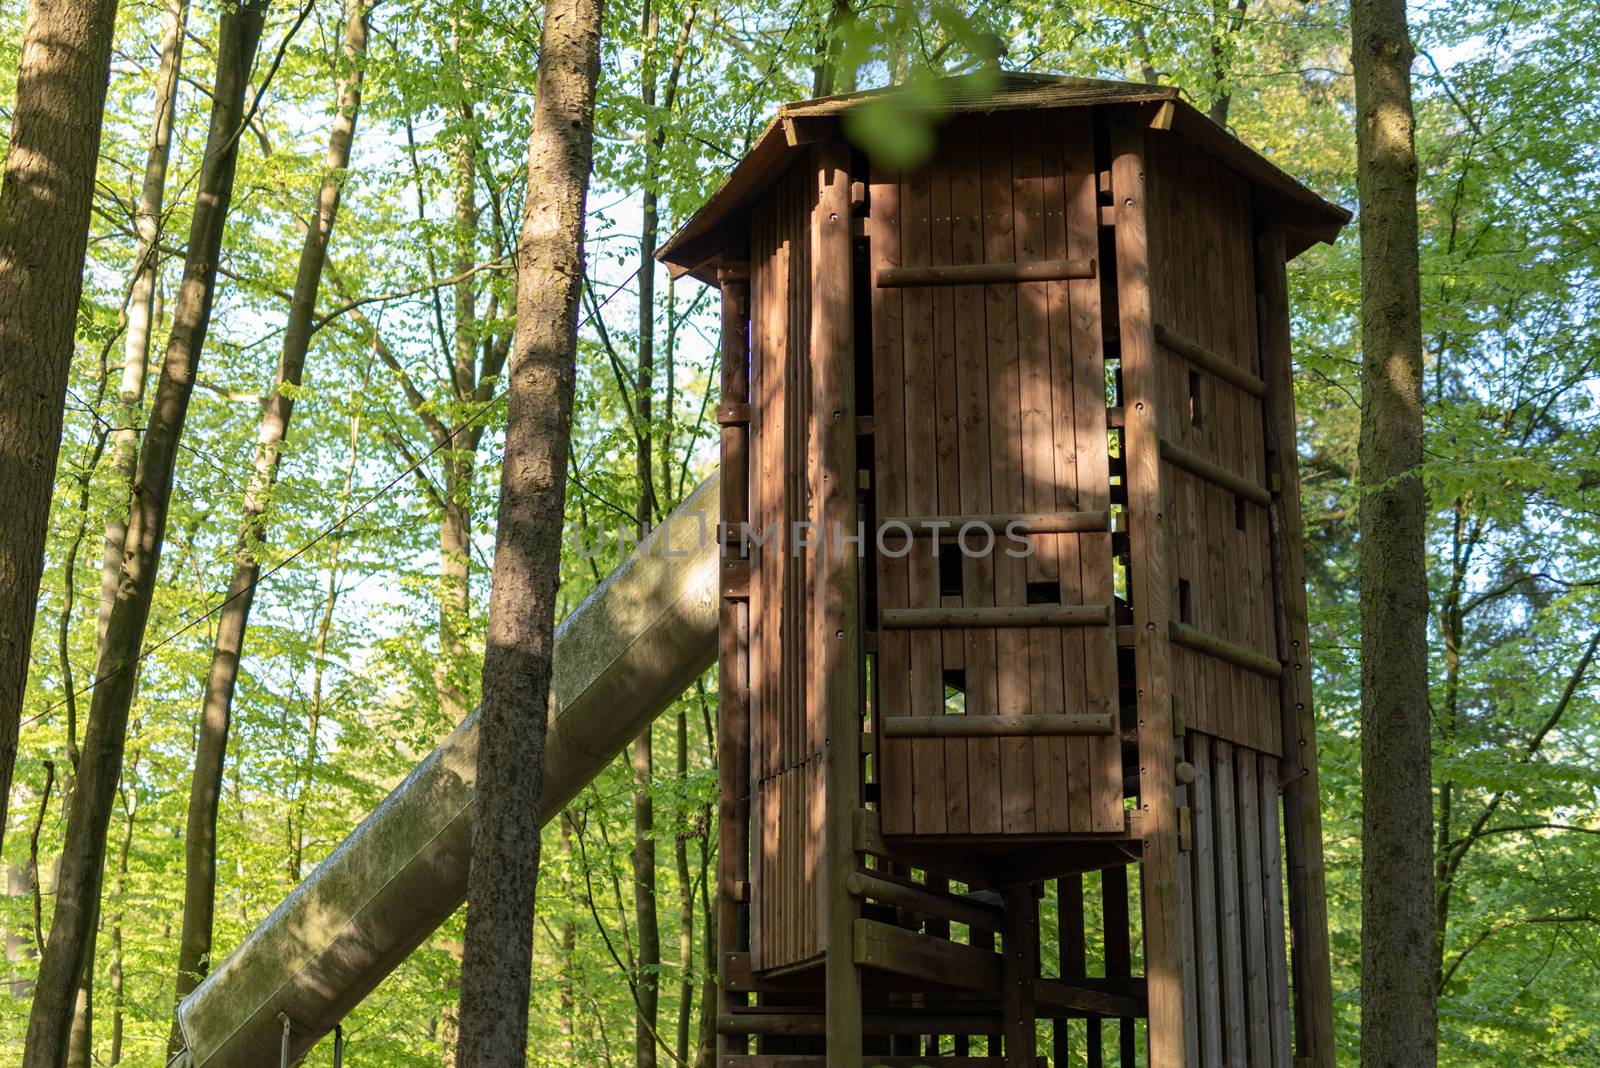 Cute wooden tree house for kids in tropical forest.